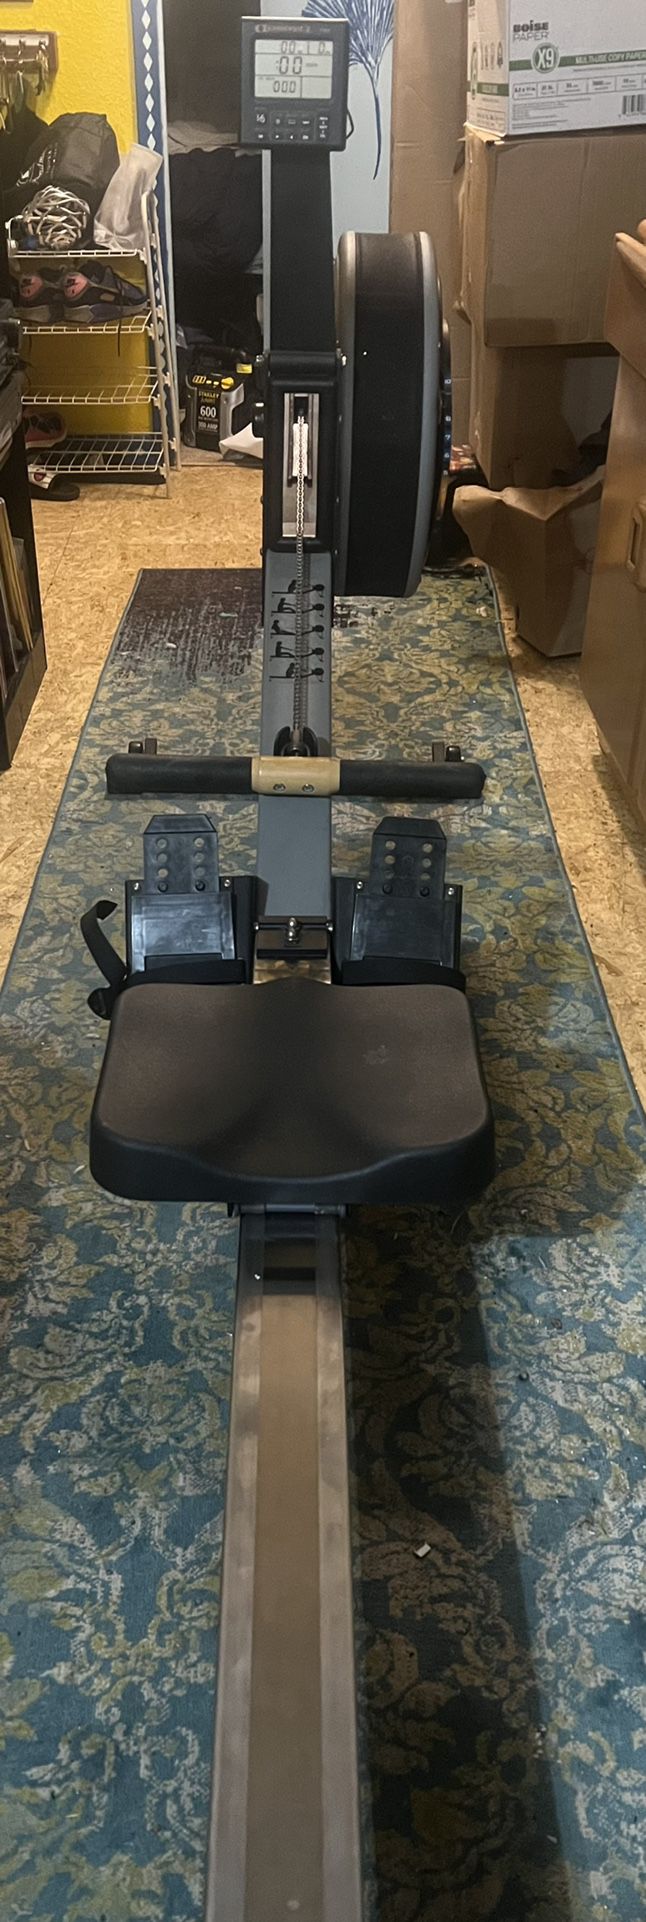 Concept 2 Model C Rower in Excellent Condition